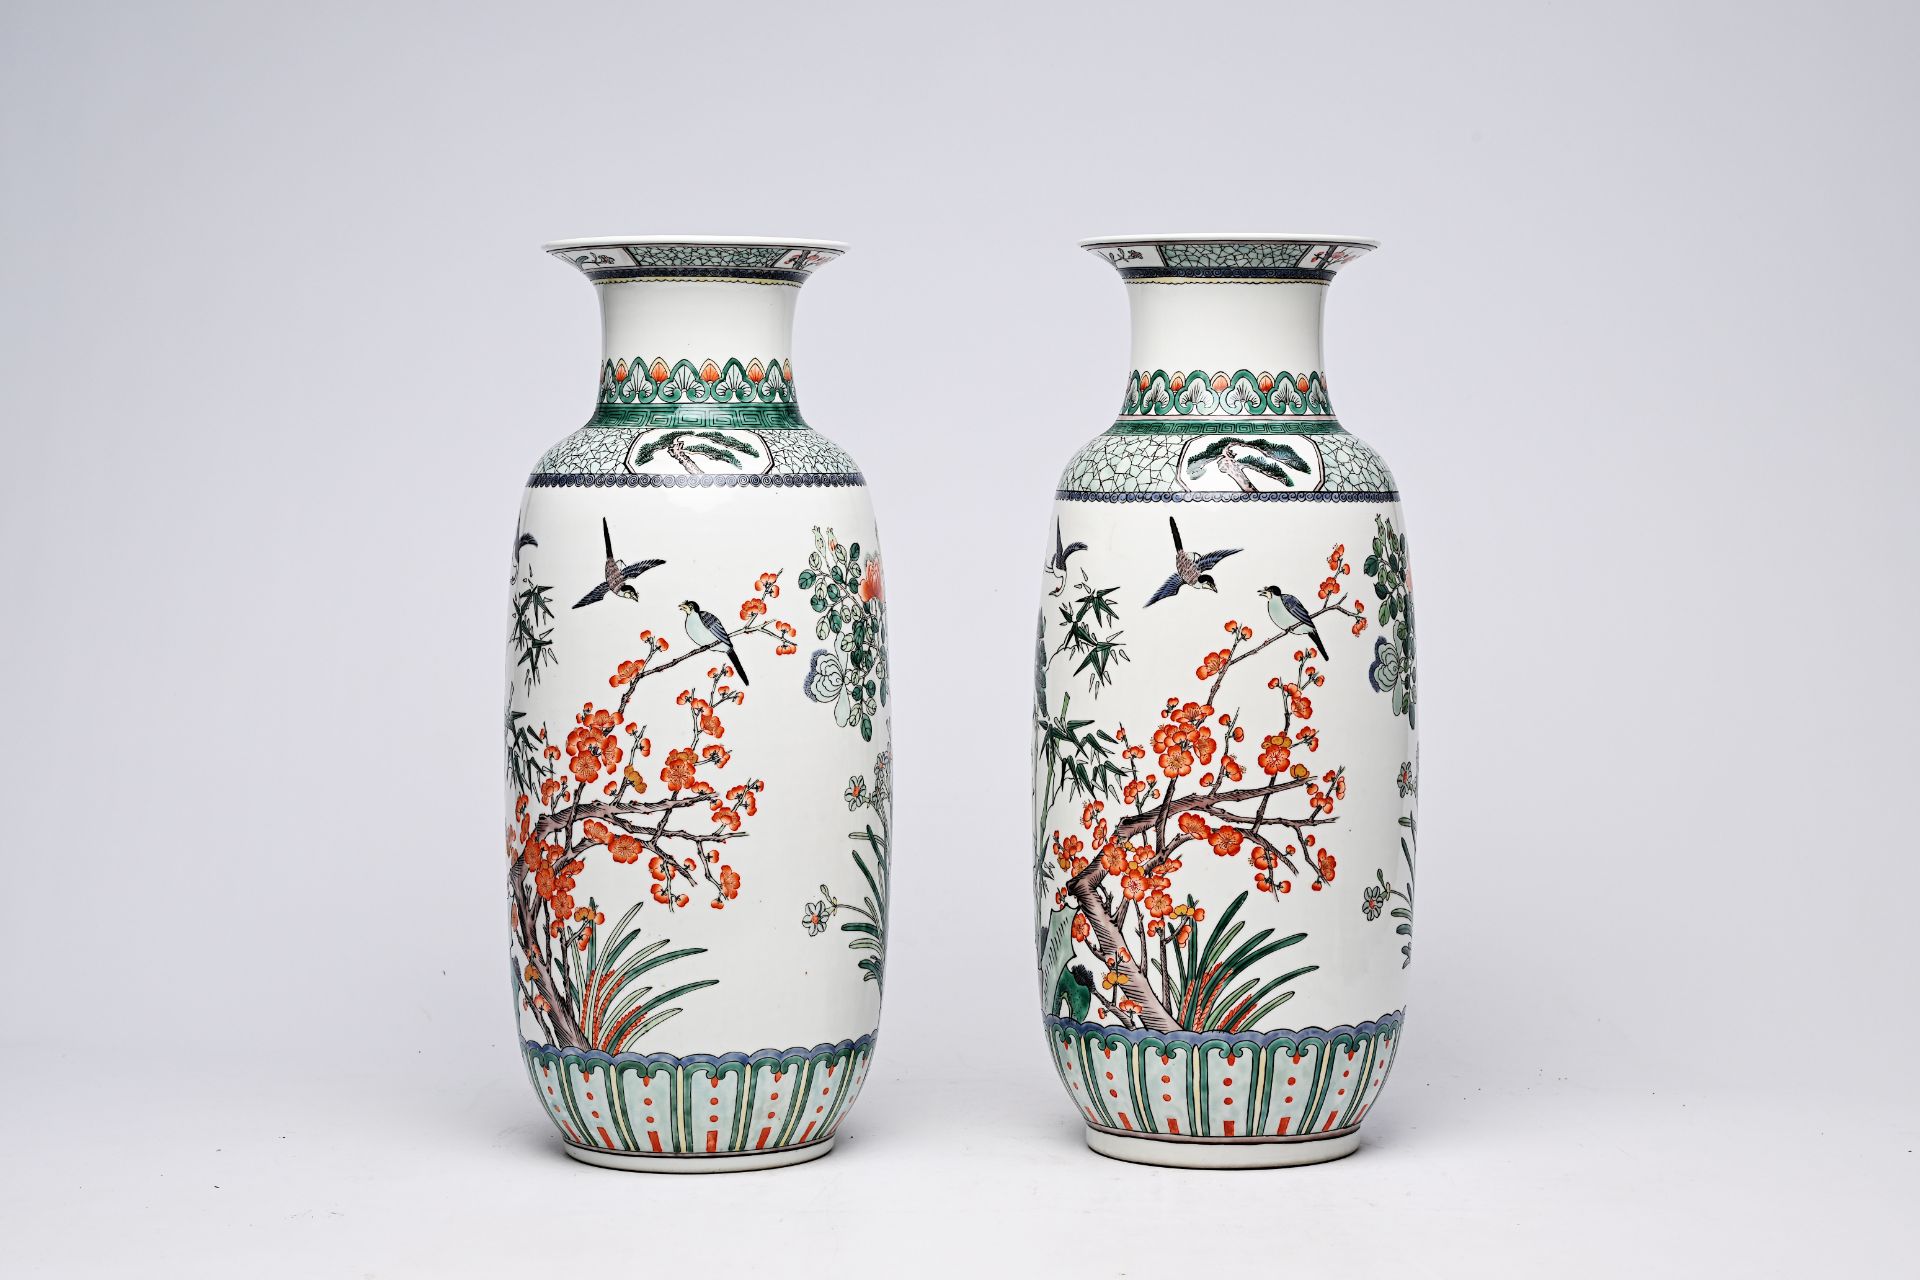 A pair of Chinese famille verte vases with birds among blossoming branches, 20th C.